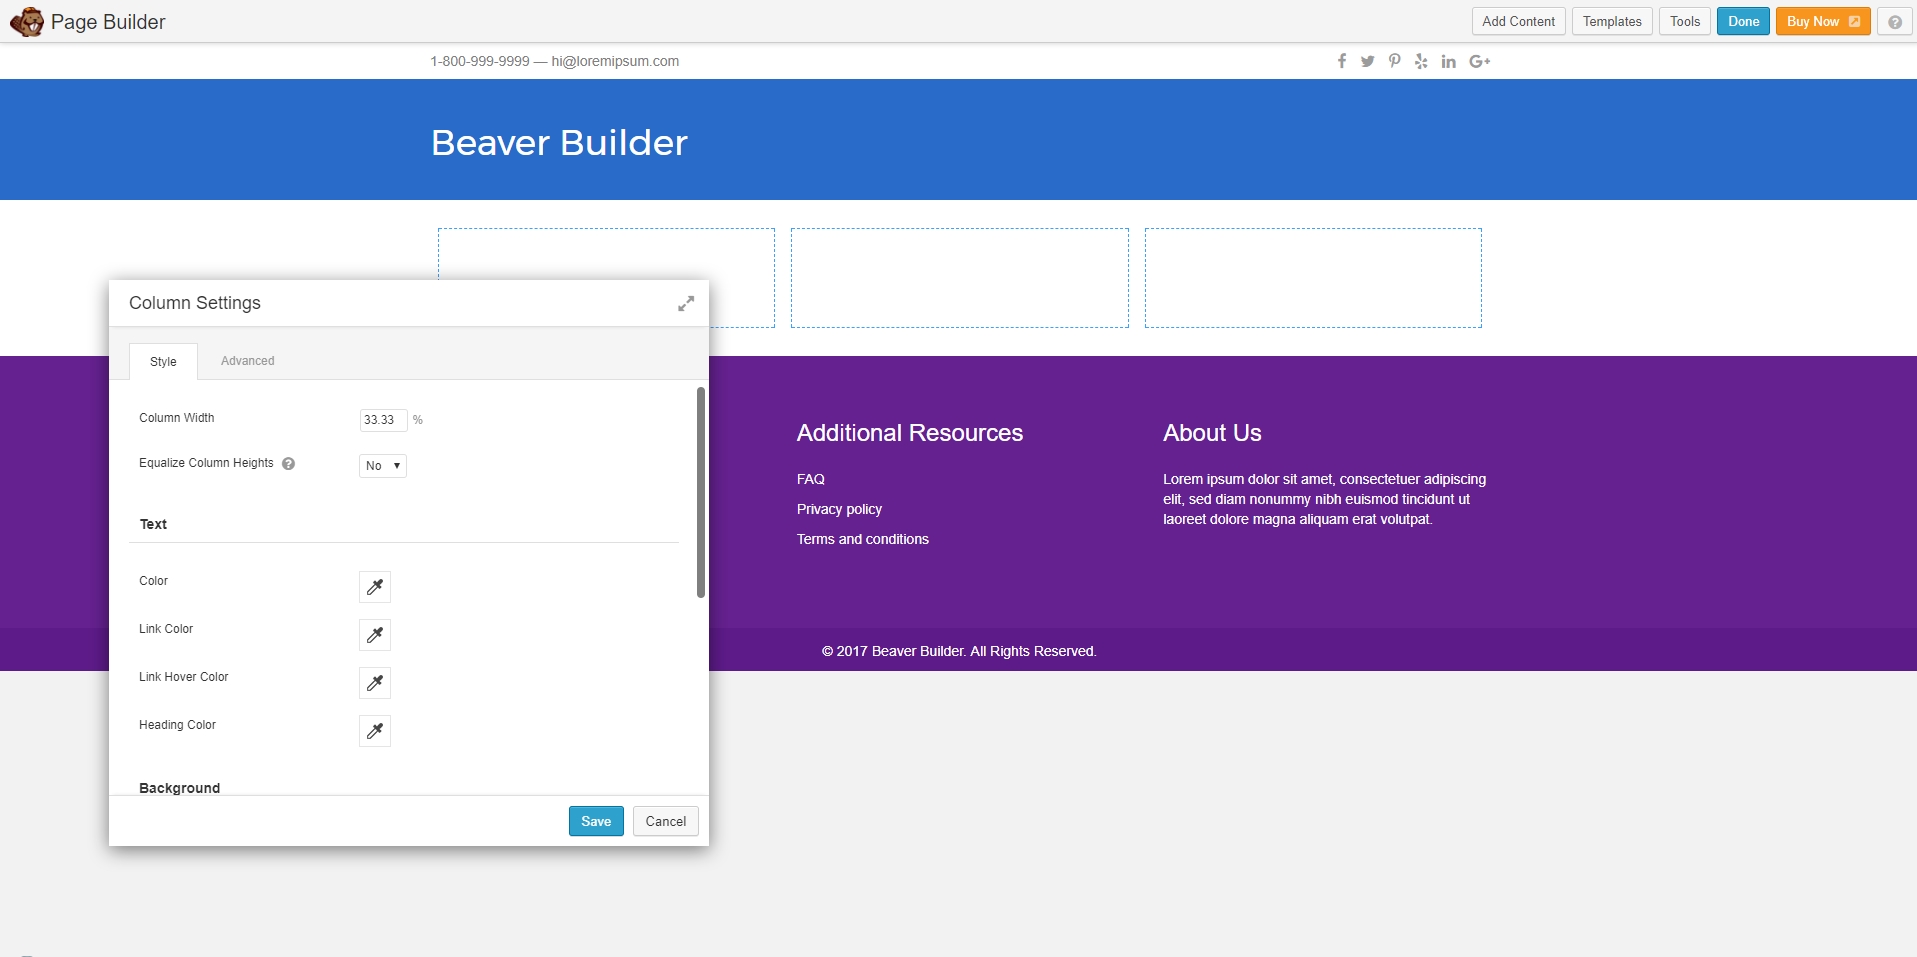 You can try out the Beaver Builder plugin for yourself at http://demo.wpbeaverbuilder.com/.